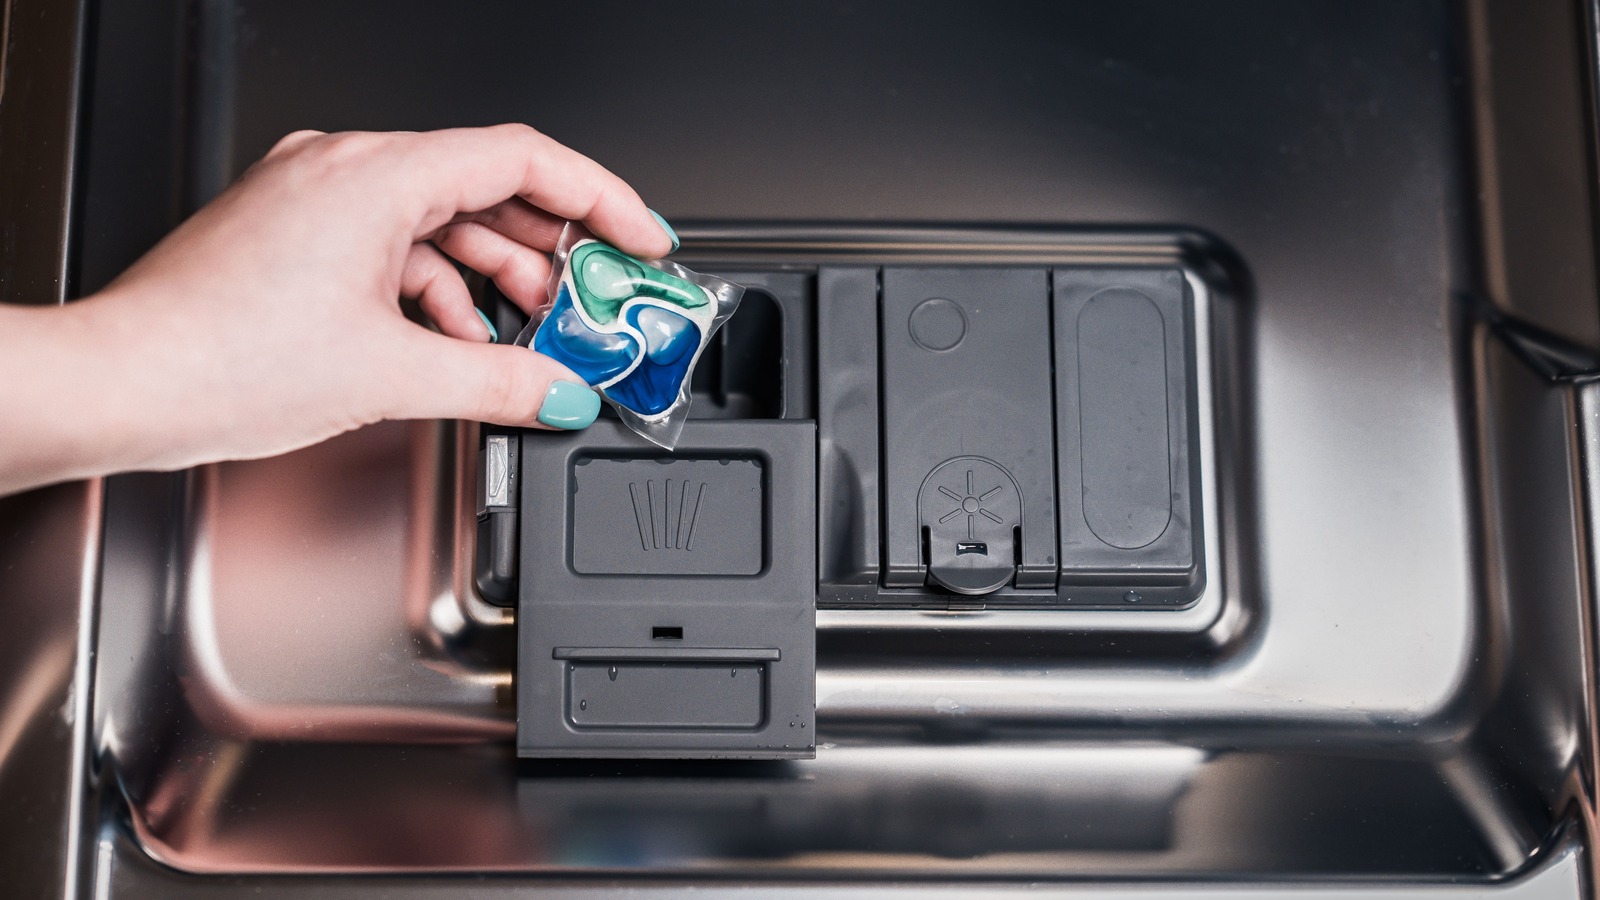 How to Fix a Stuck Dishwasher Soap Dispenser